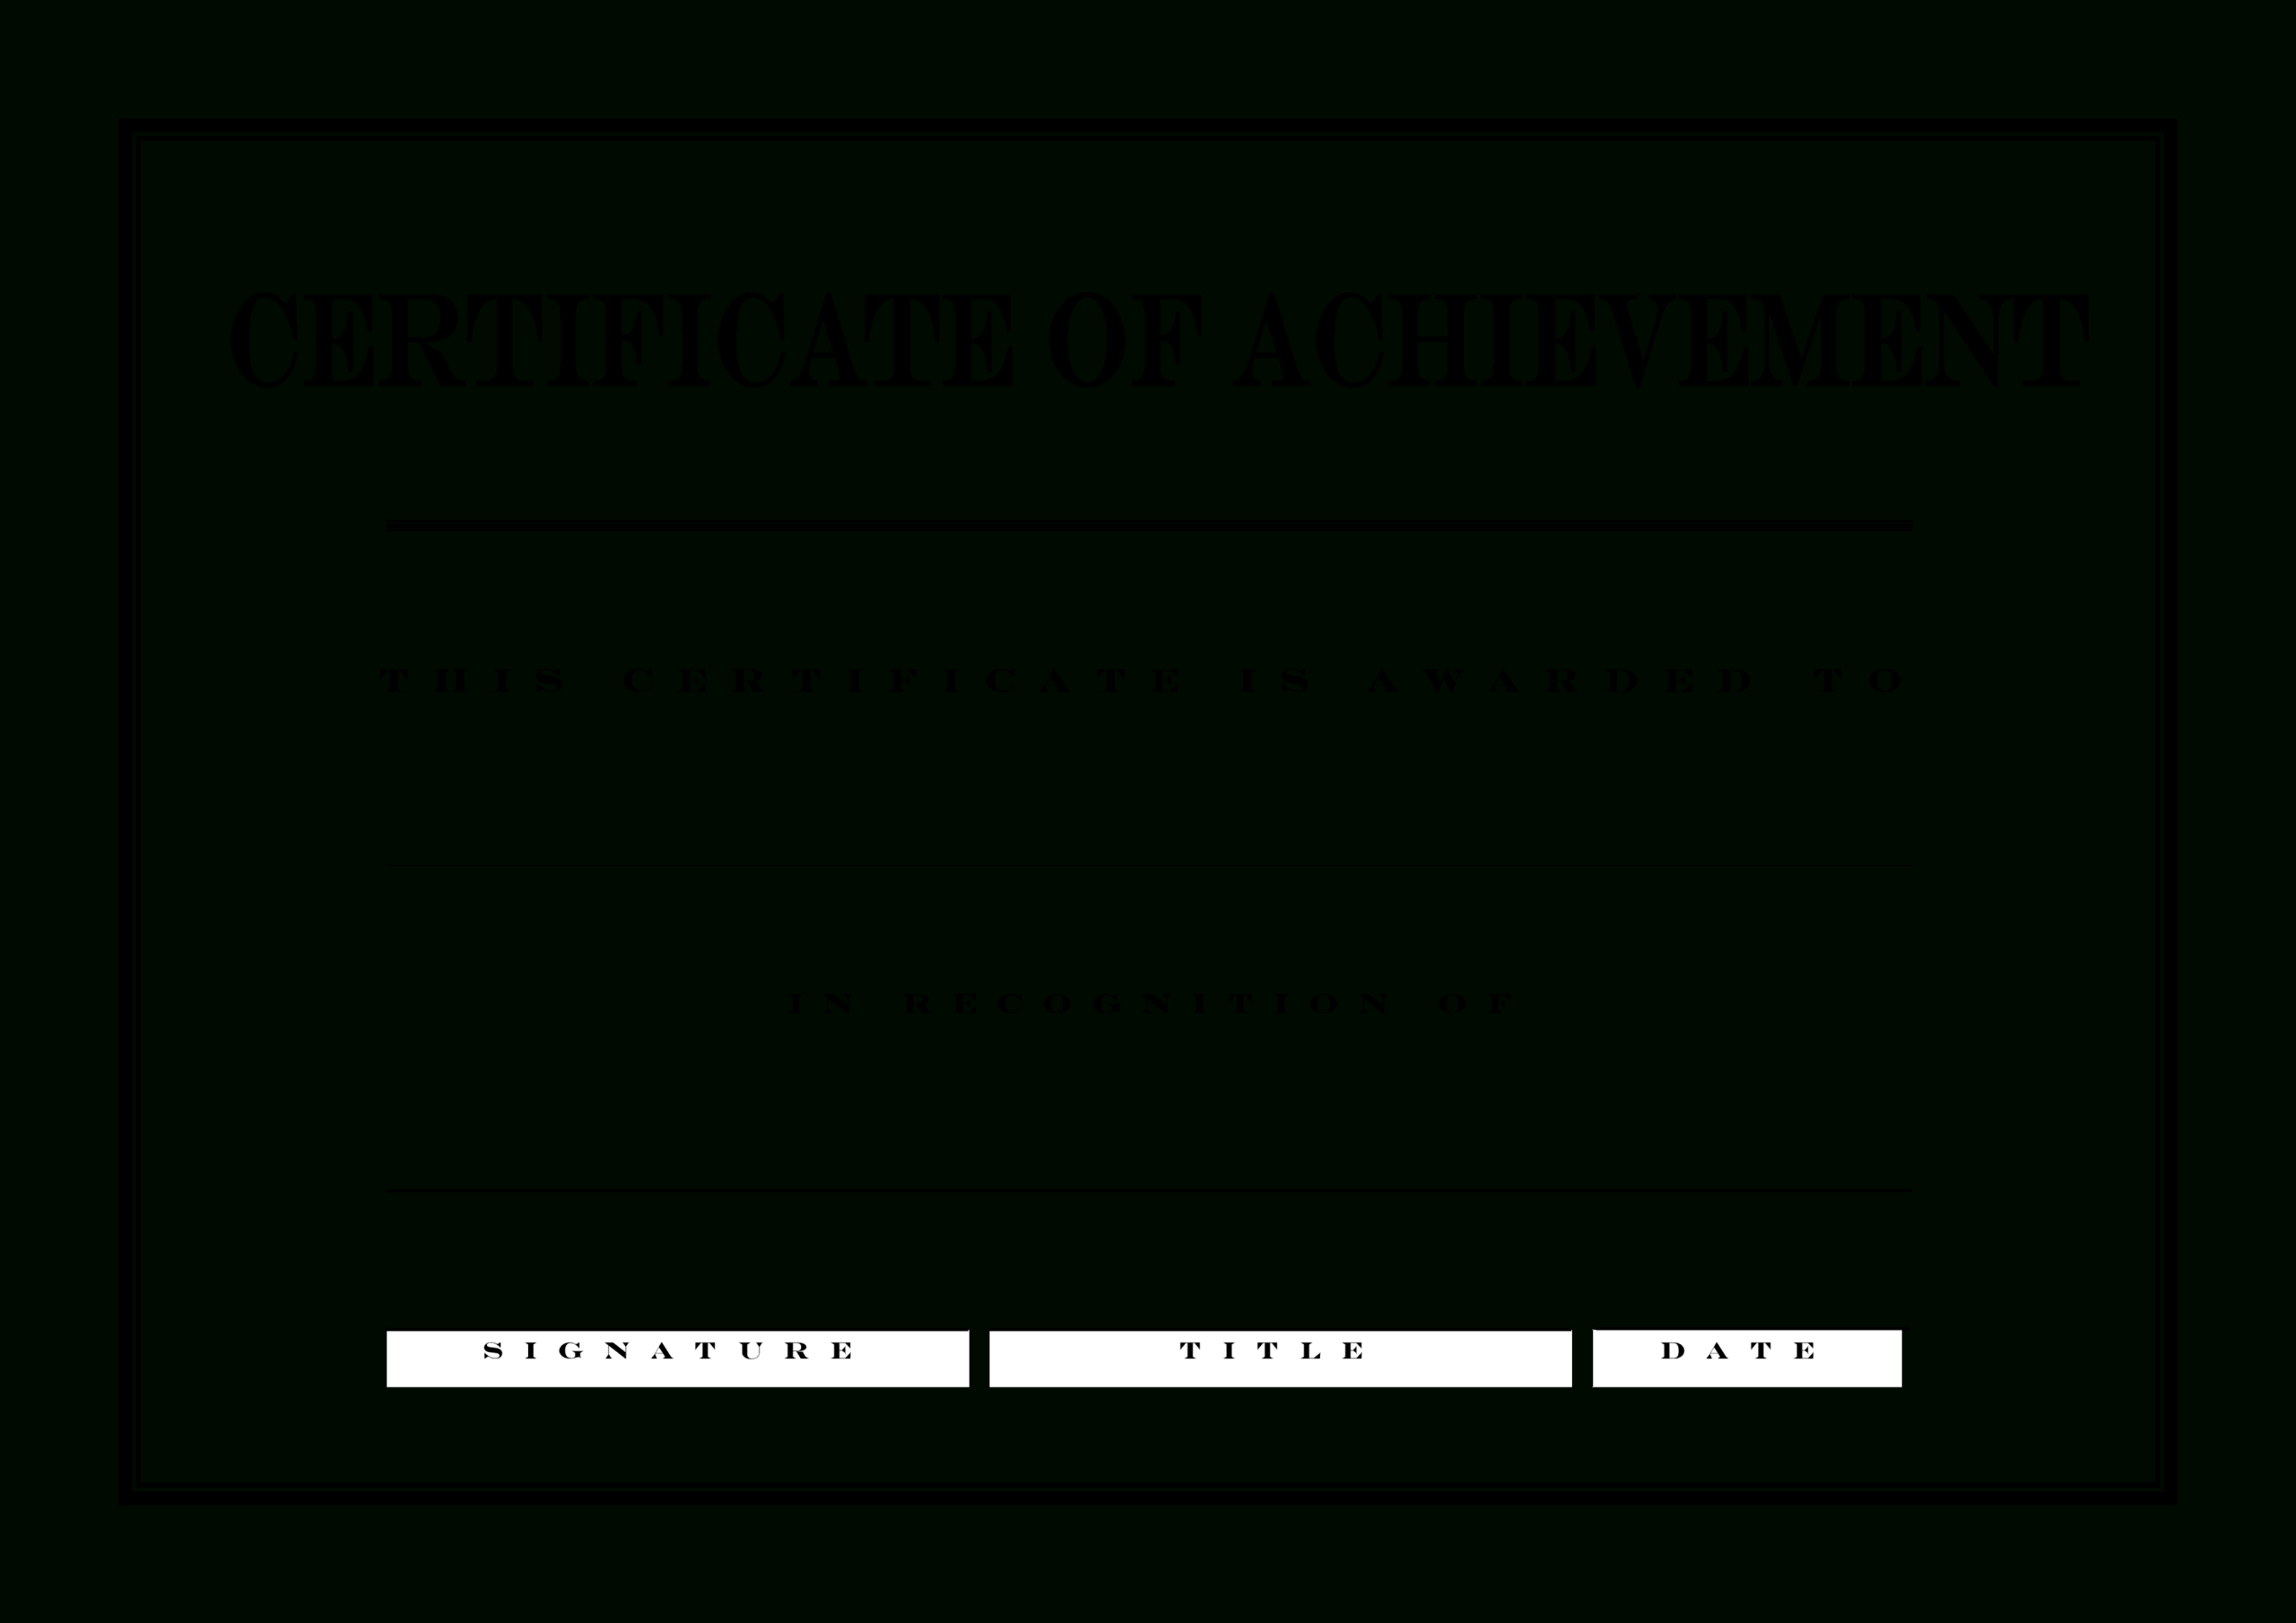 Engraved Certificate Of Achievement | Templates At For Blank Certificate Of Achievement Template